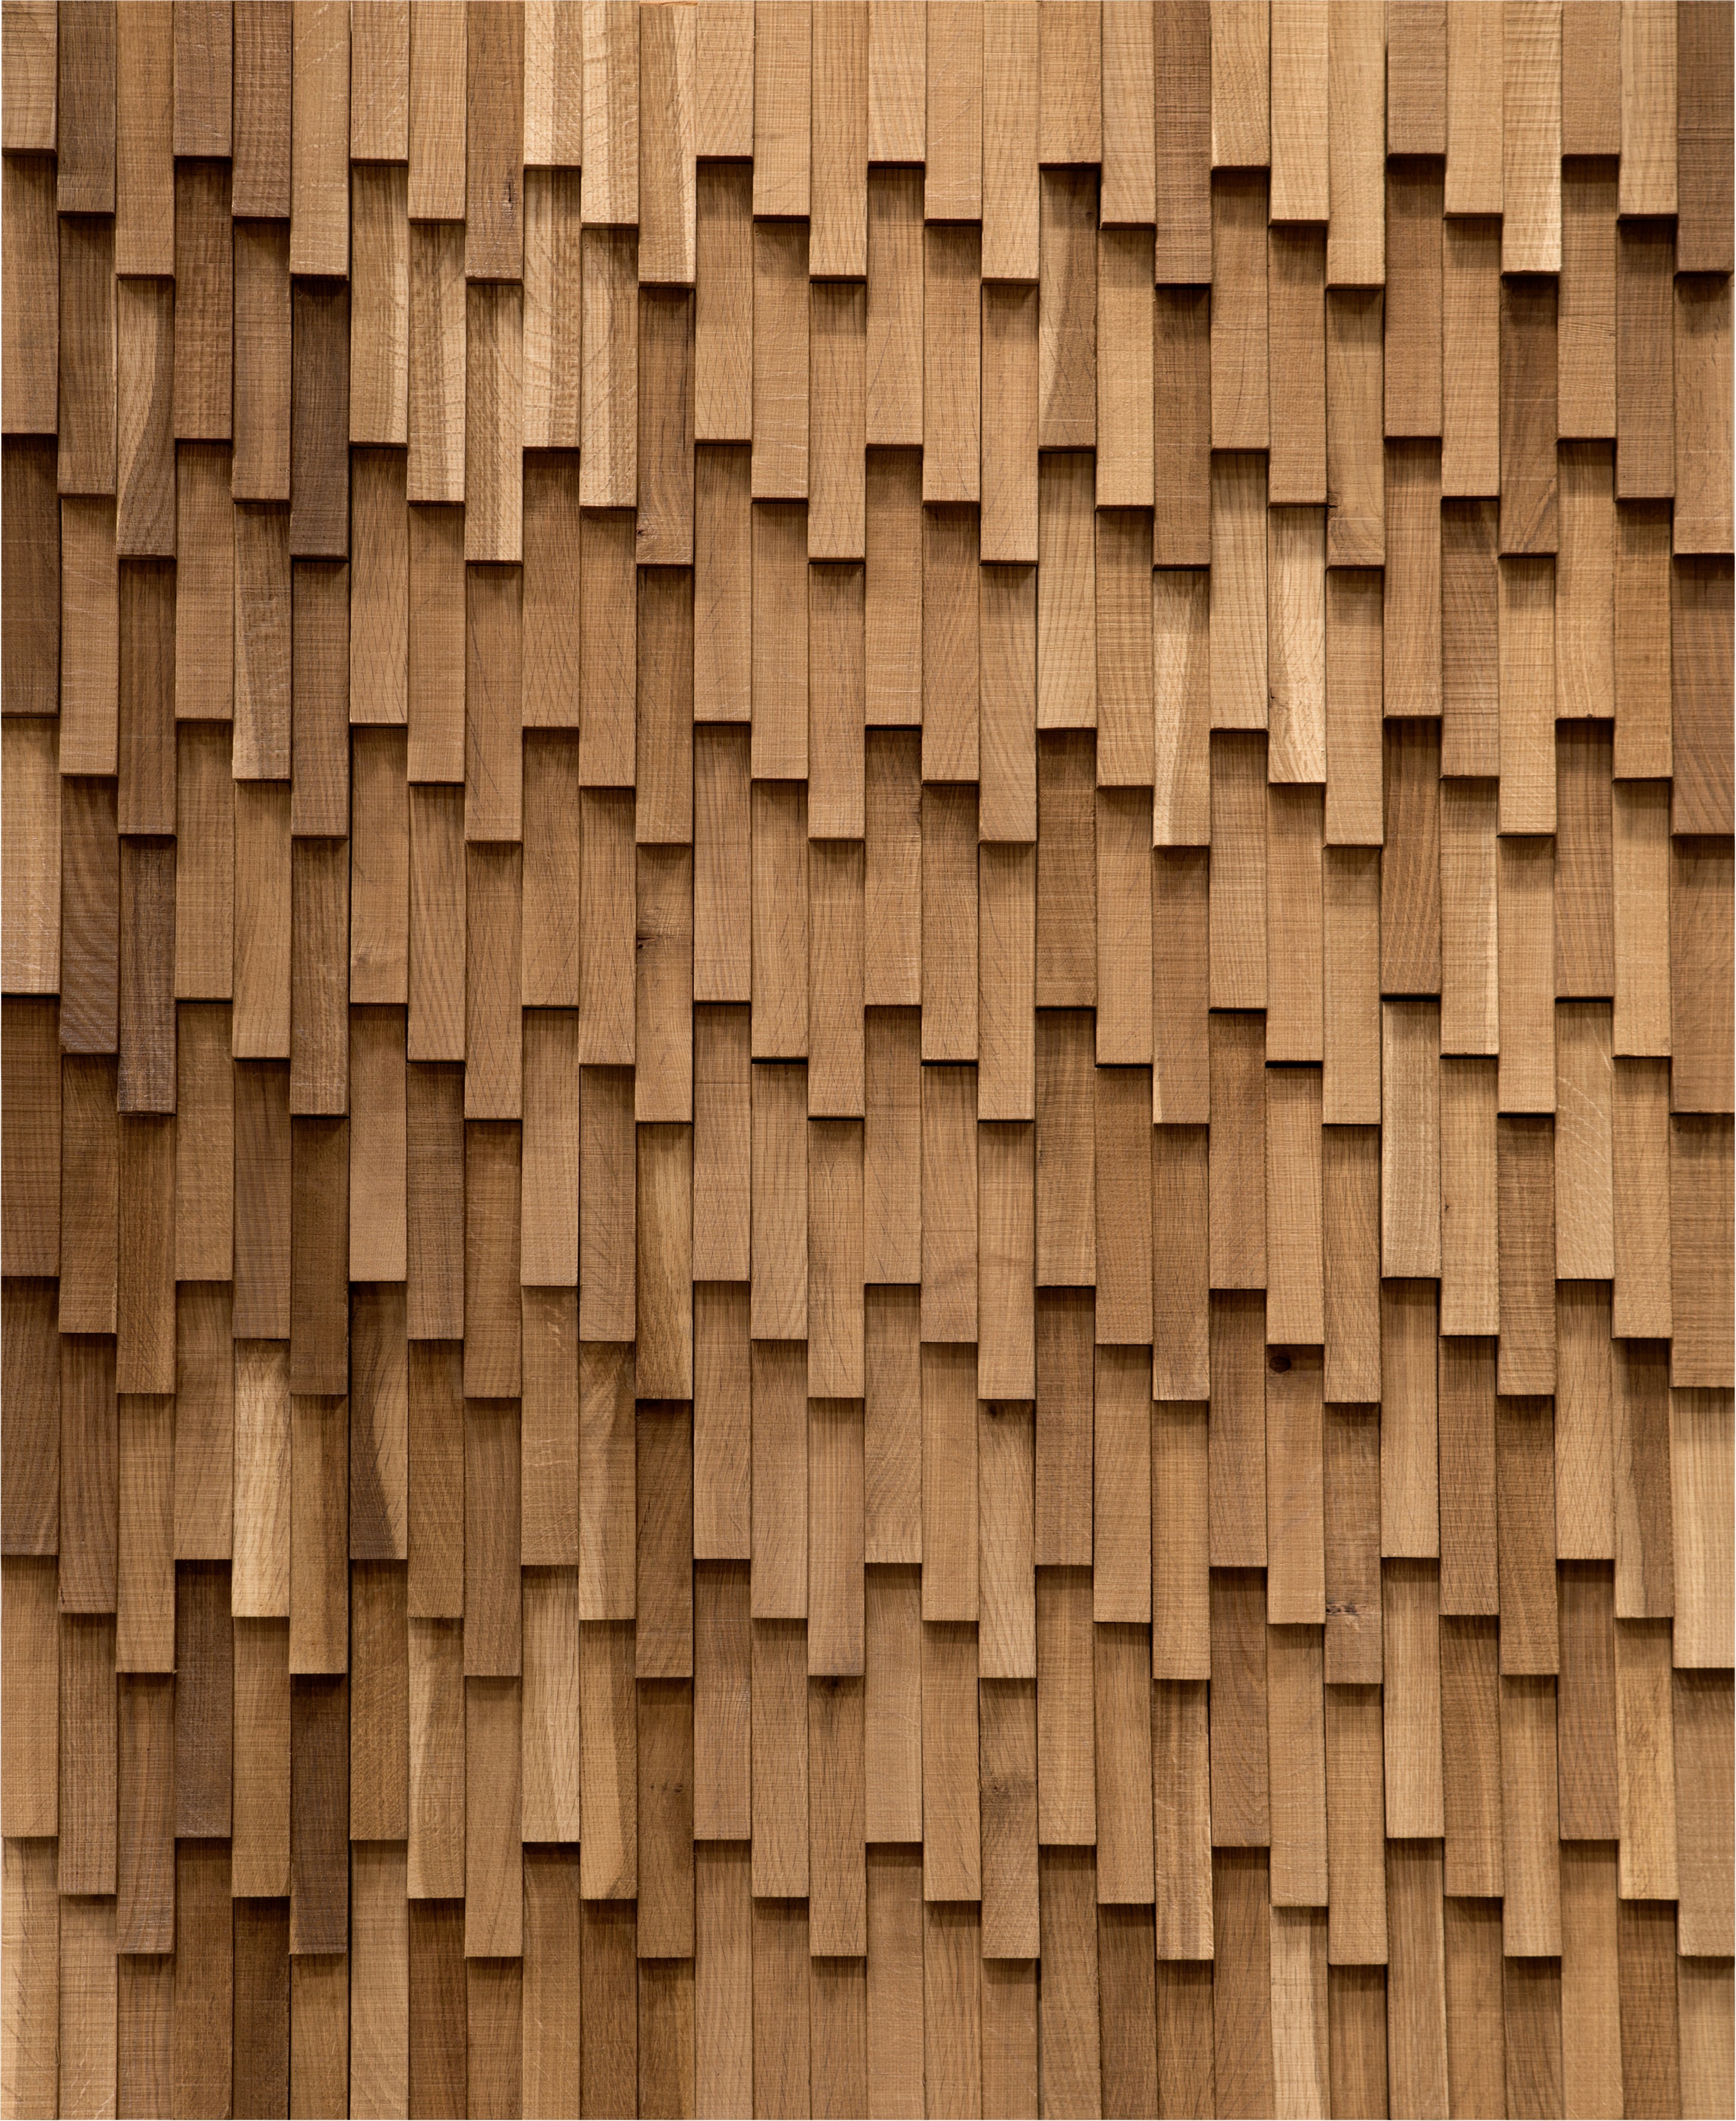 duchateau inceptiv wave olde dutch oak three dimensional wall natural wood panel lacquer for interior use distributed by surface group international